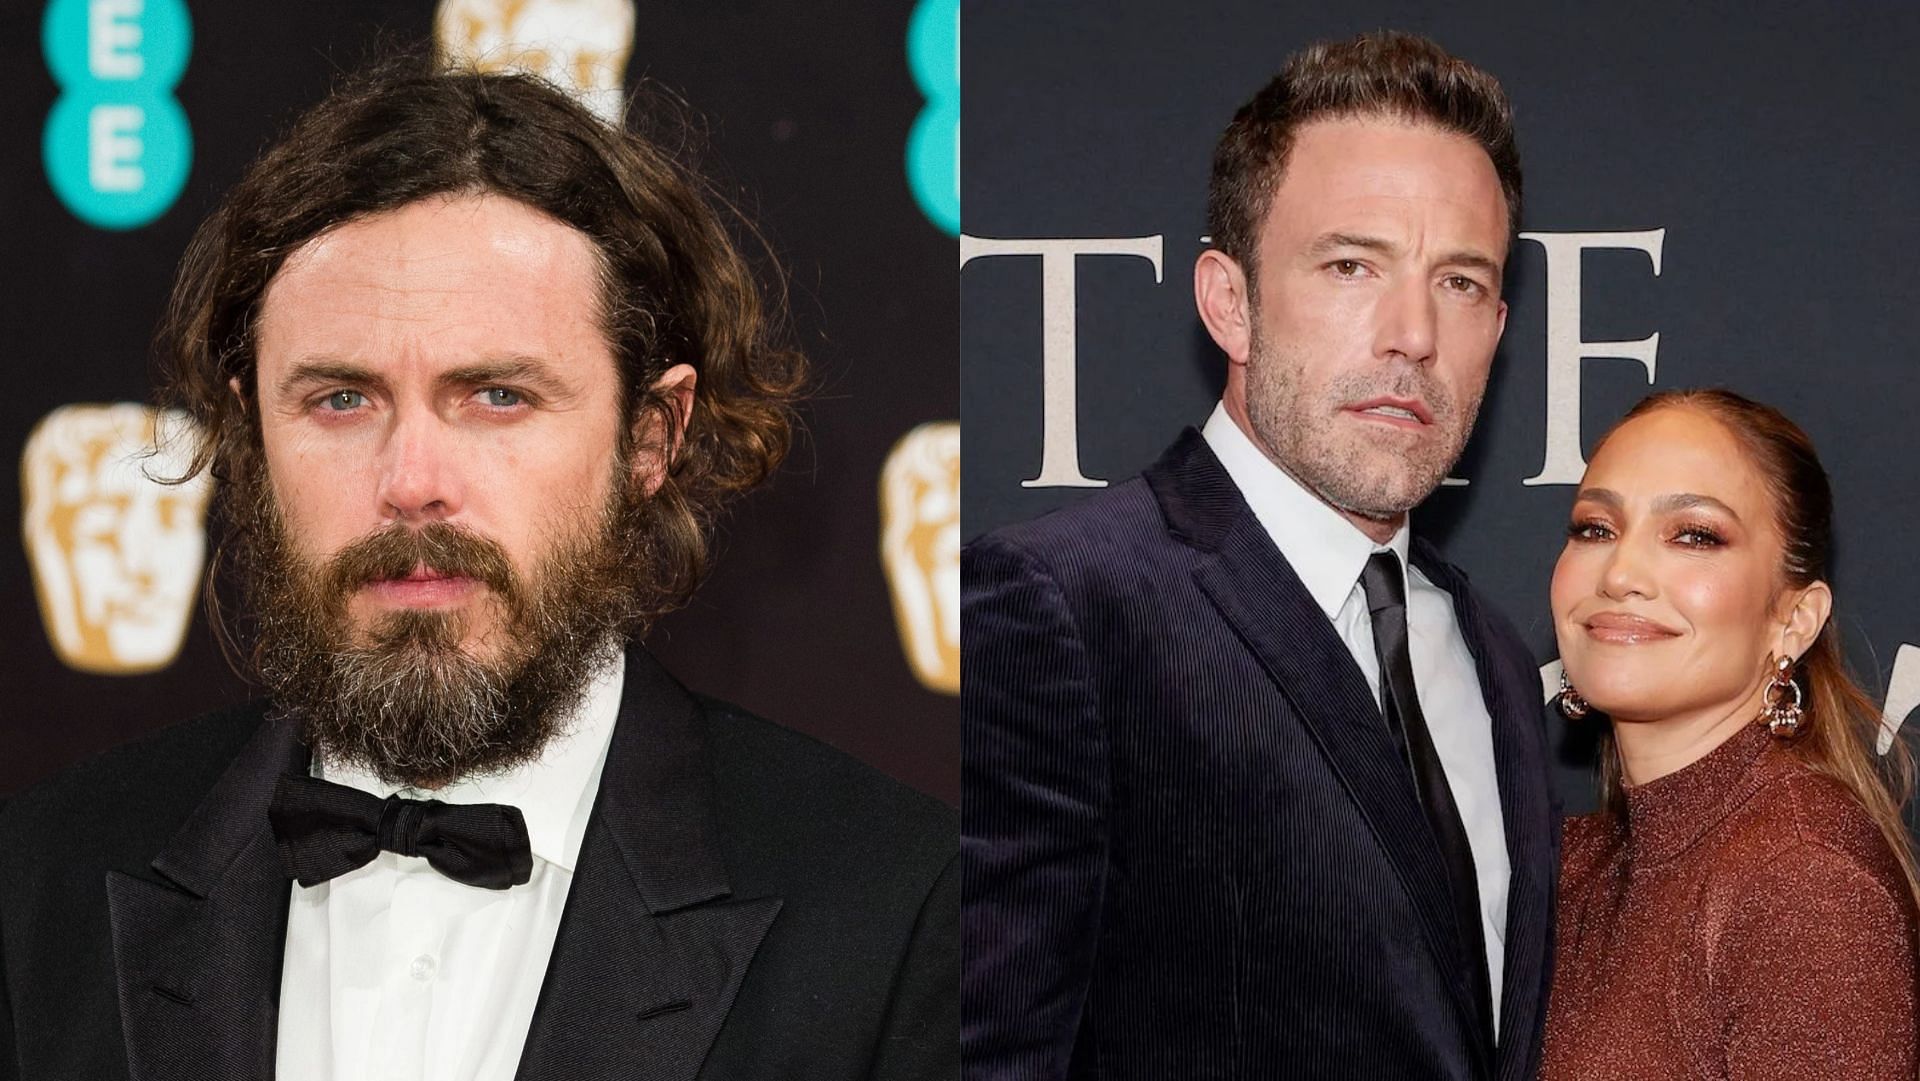 Ben Affleck&#039;s brother, Casey, was not present at his second wedding. (Image via Jeff Spicer/Getty, Arturo Holmes/Getty)